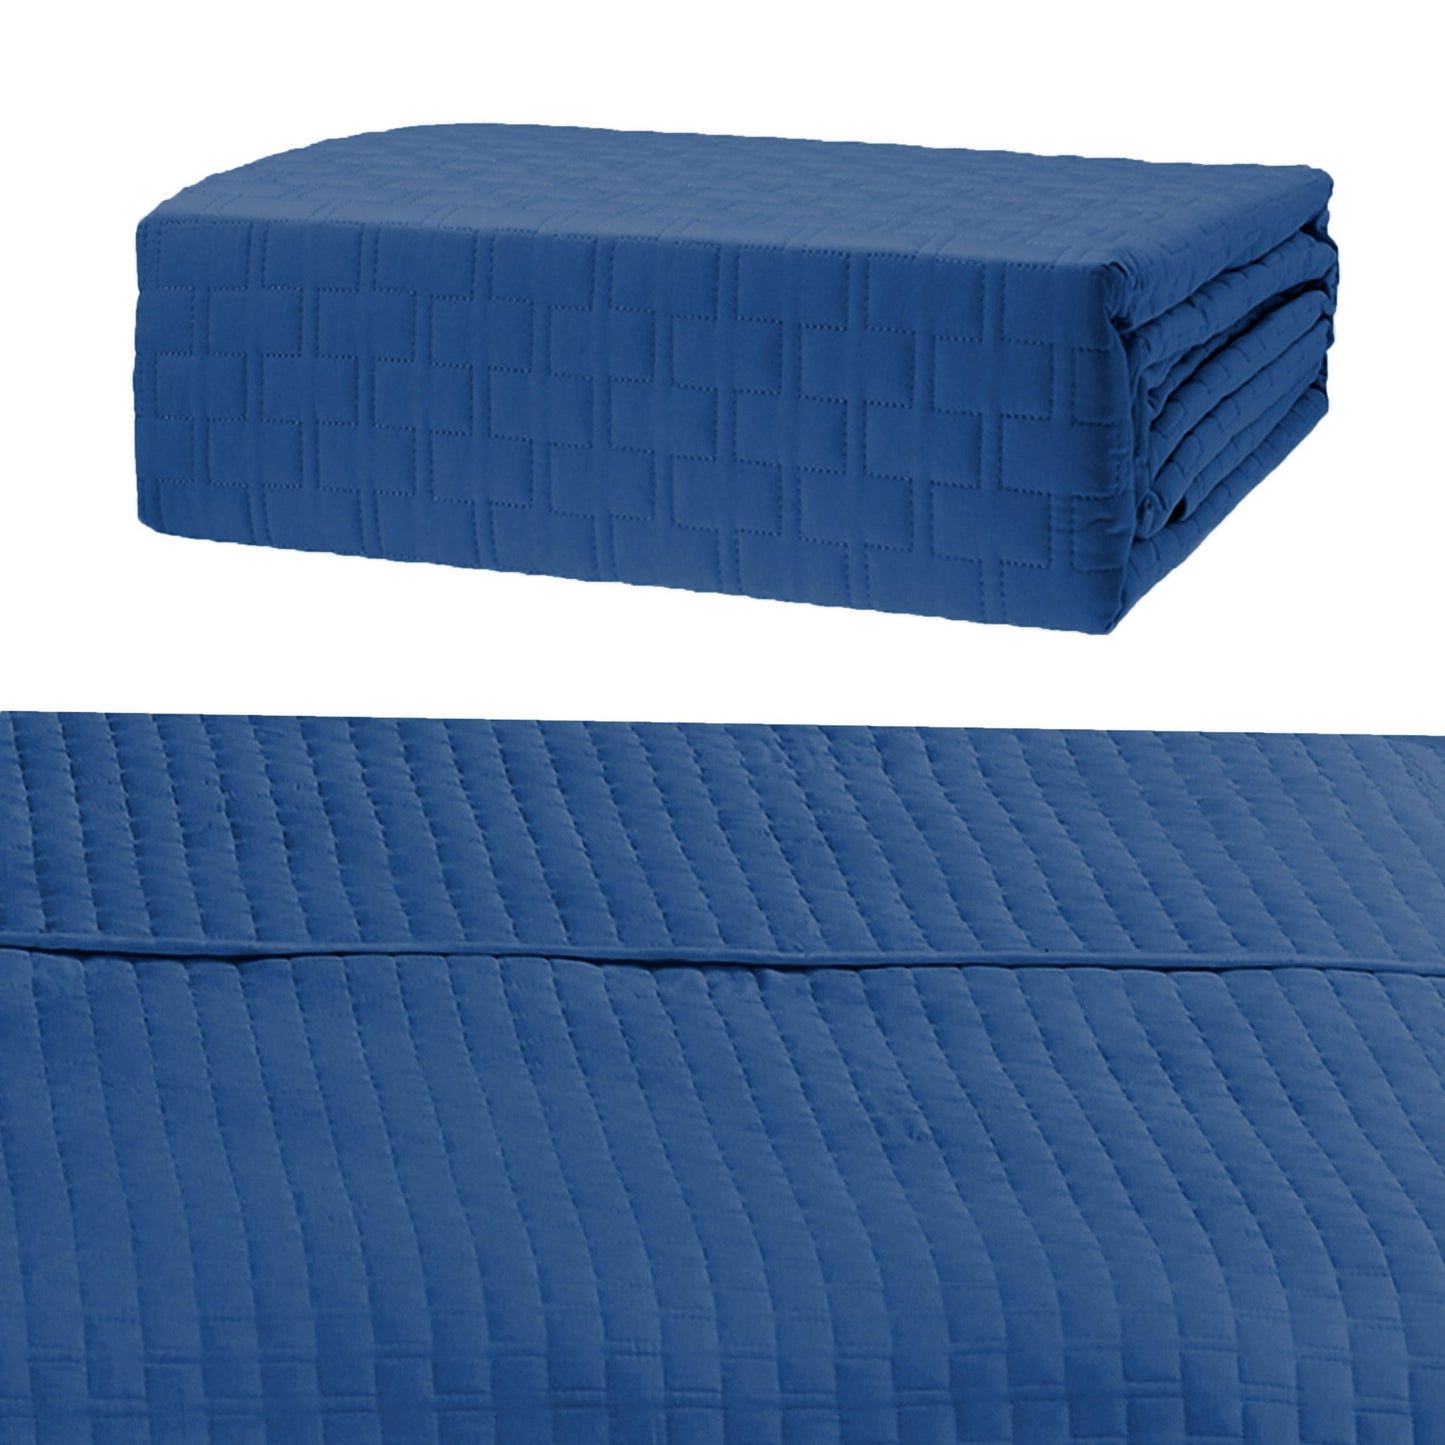 BedVoyage 100% Rayon Viscose Bamboo Quilted Coverlet